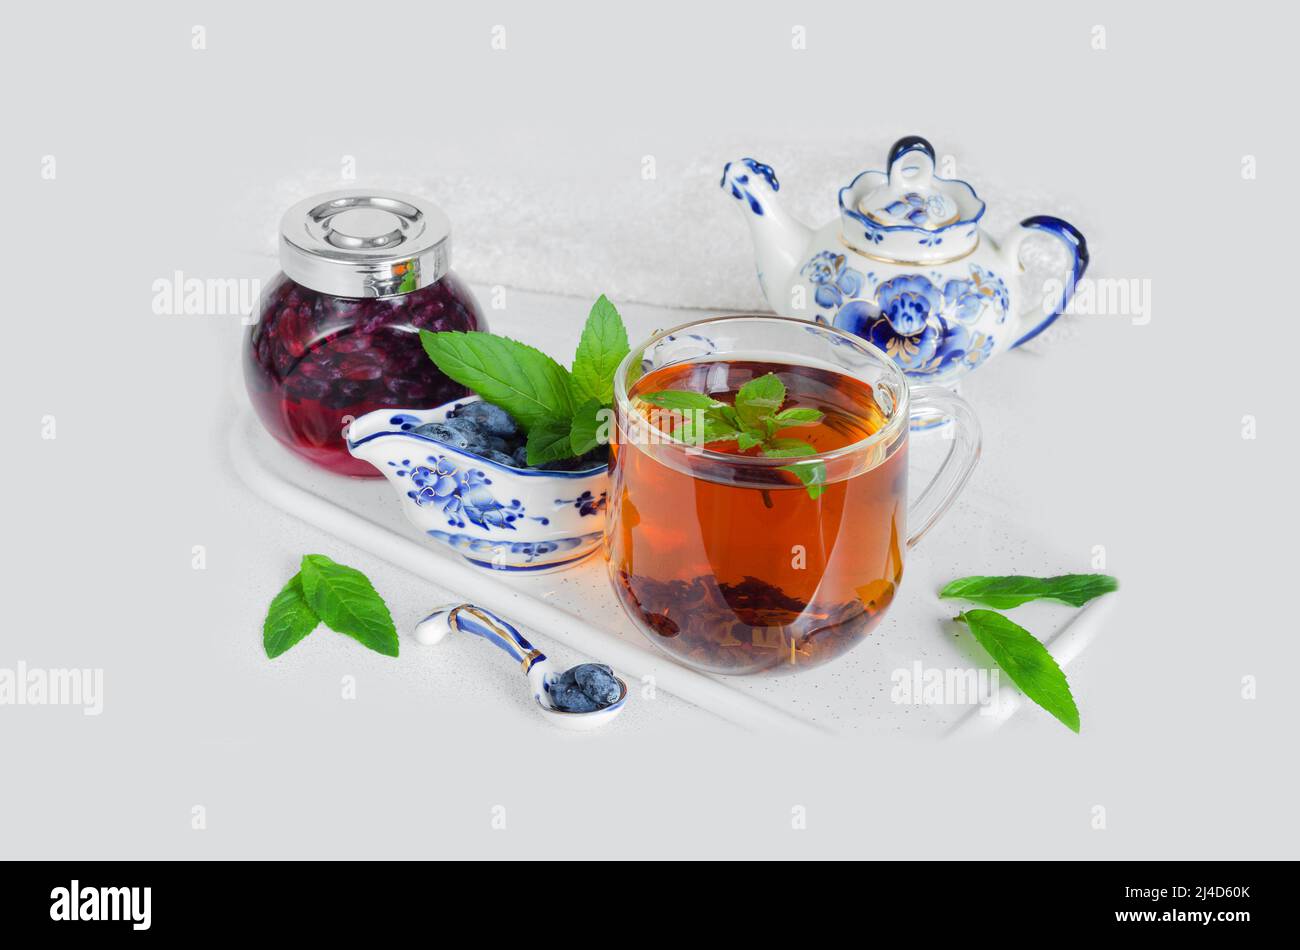 https://c8.alamy.com/comp/2J4D60K/a-cup-of-mint-tea-fresh-honeysuckle-berries-with-sugar-mint-leaves-and-beautiful-dishes-on-the-kitchen-countertop-selective-focus-2J4D60K.jpg